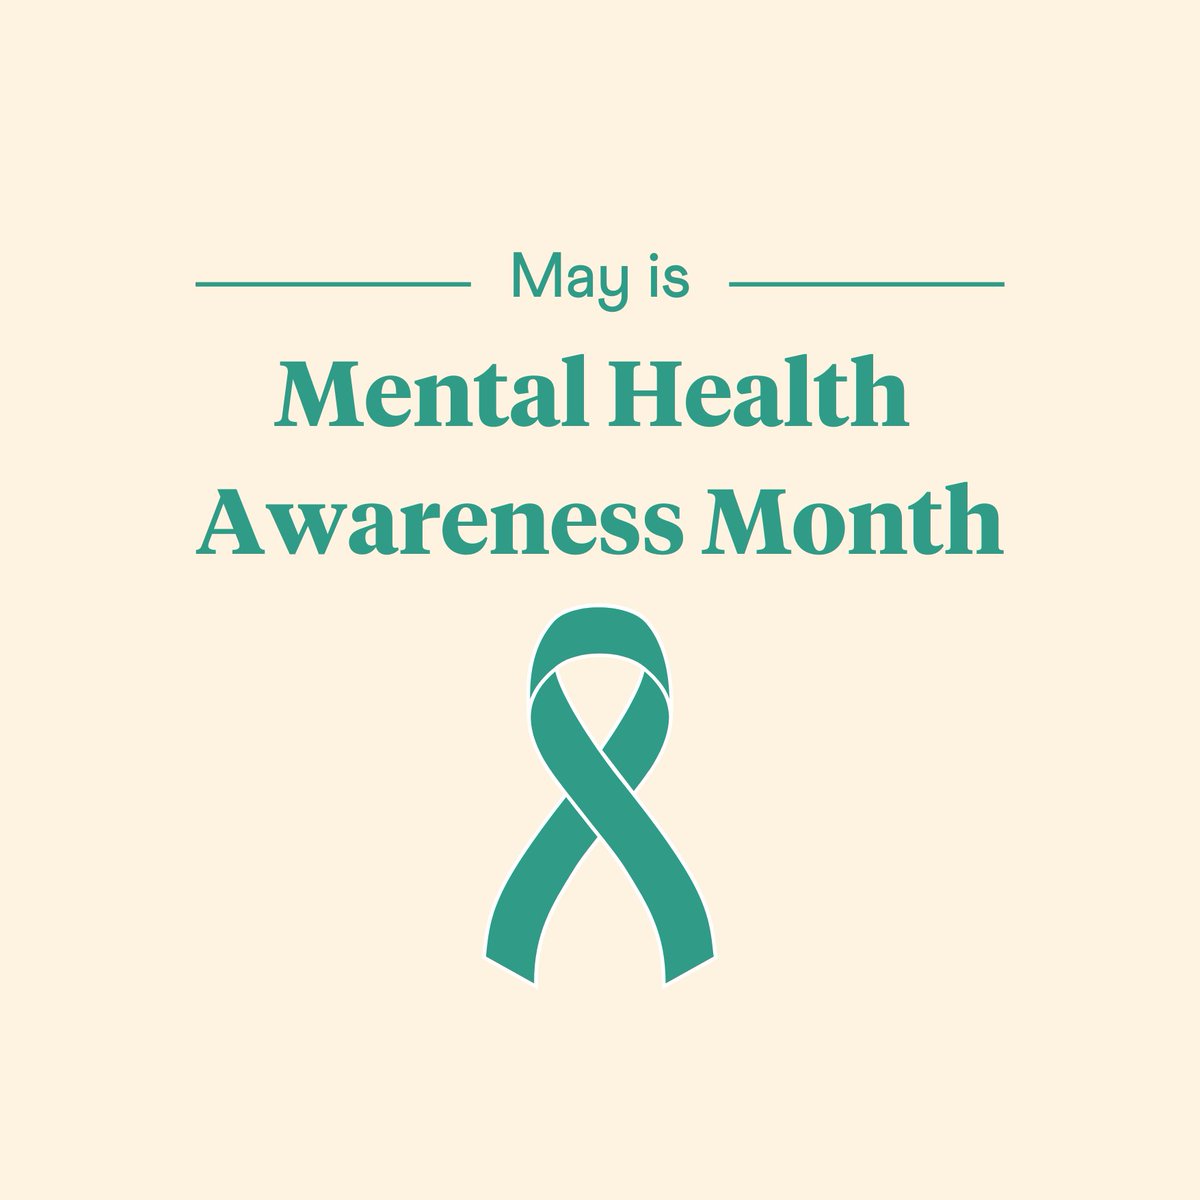 In recognition of #MentalHealthAwarenessMonth, I want to emphasize the importance of mental health care that focuses on the whole child. In the U.S. nearly 1 in 5 children experience a mental, emotional, or behavioral disorder annually, yet many do not receive the care they need.